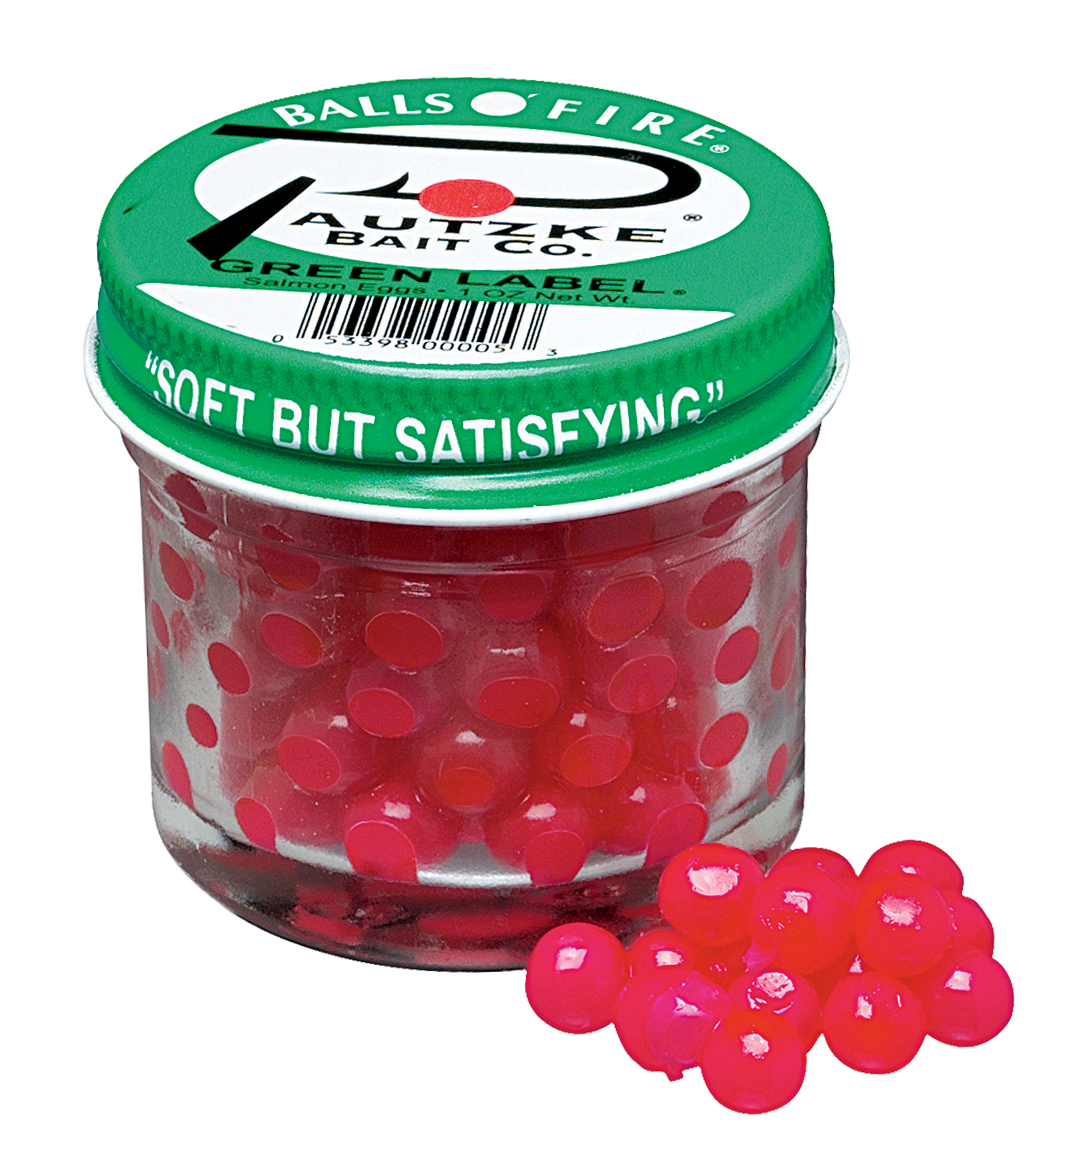 Attractant, Bait For Salmon & Trout - Go Salmon Fishing